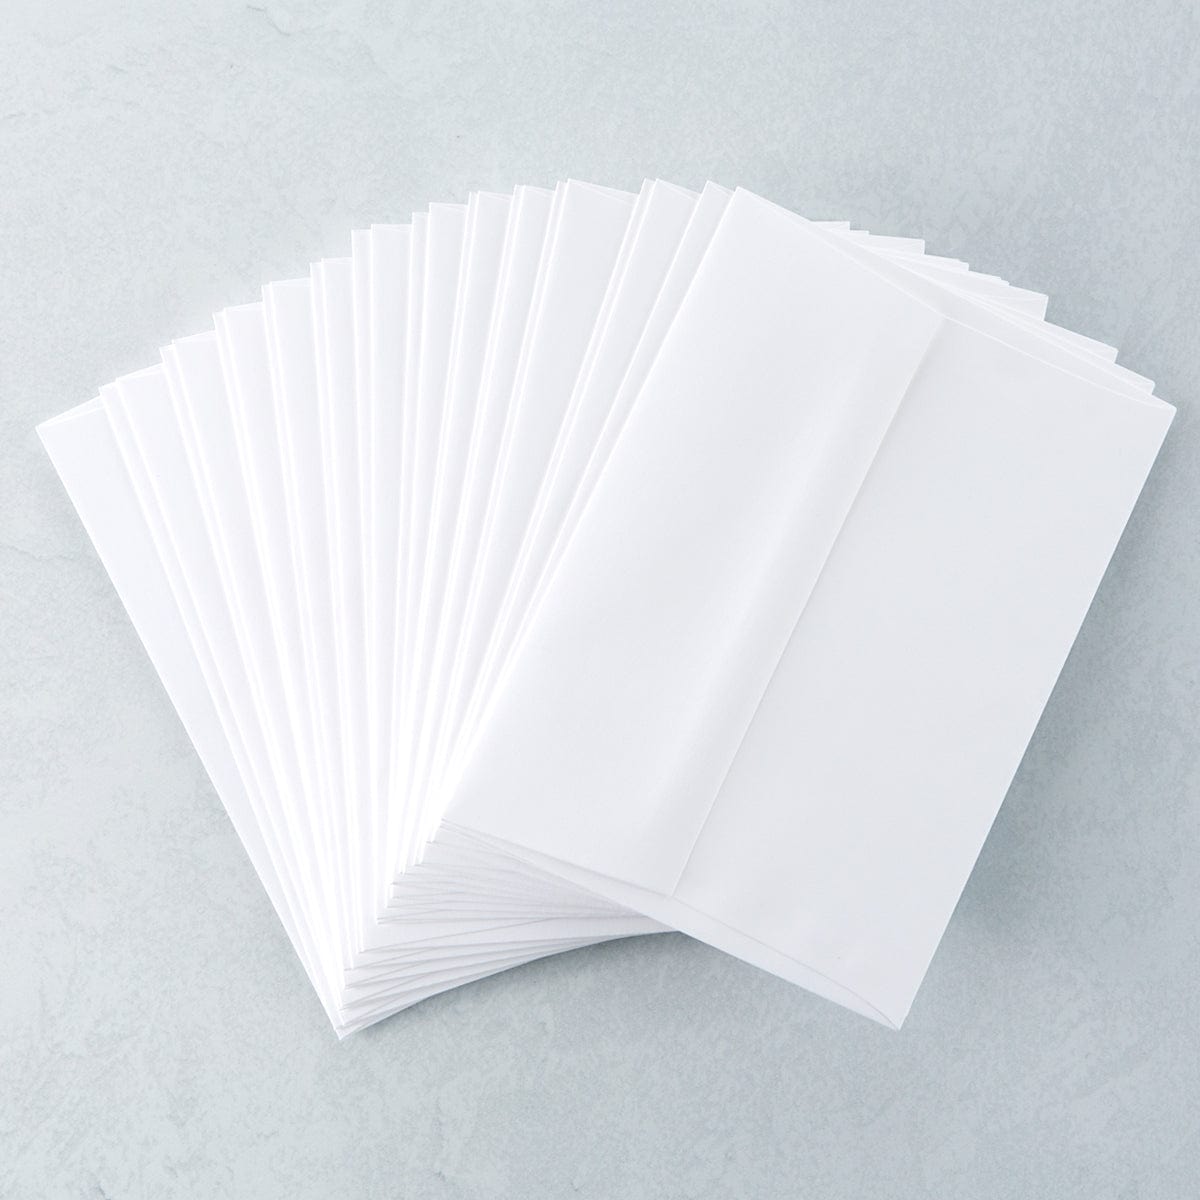 BASIS Colors A7 ENVELOPES for 5x7 Cards and Invitations - 25 Pack - Closeout